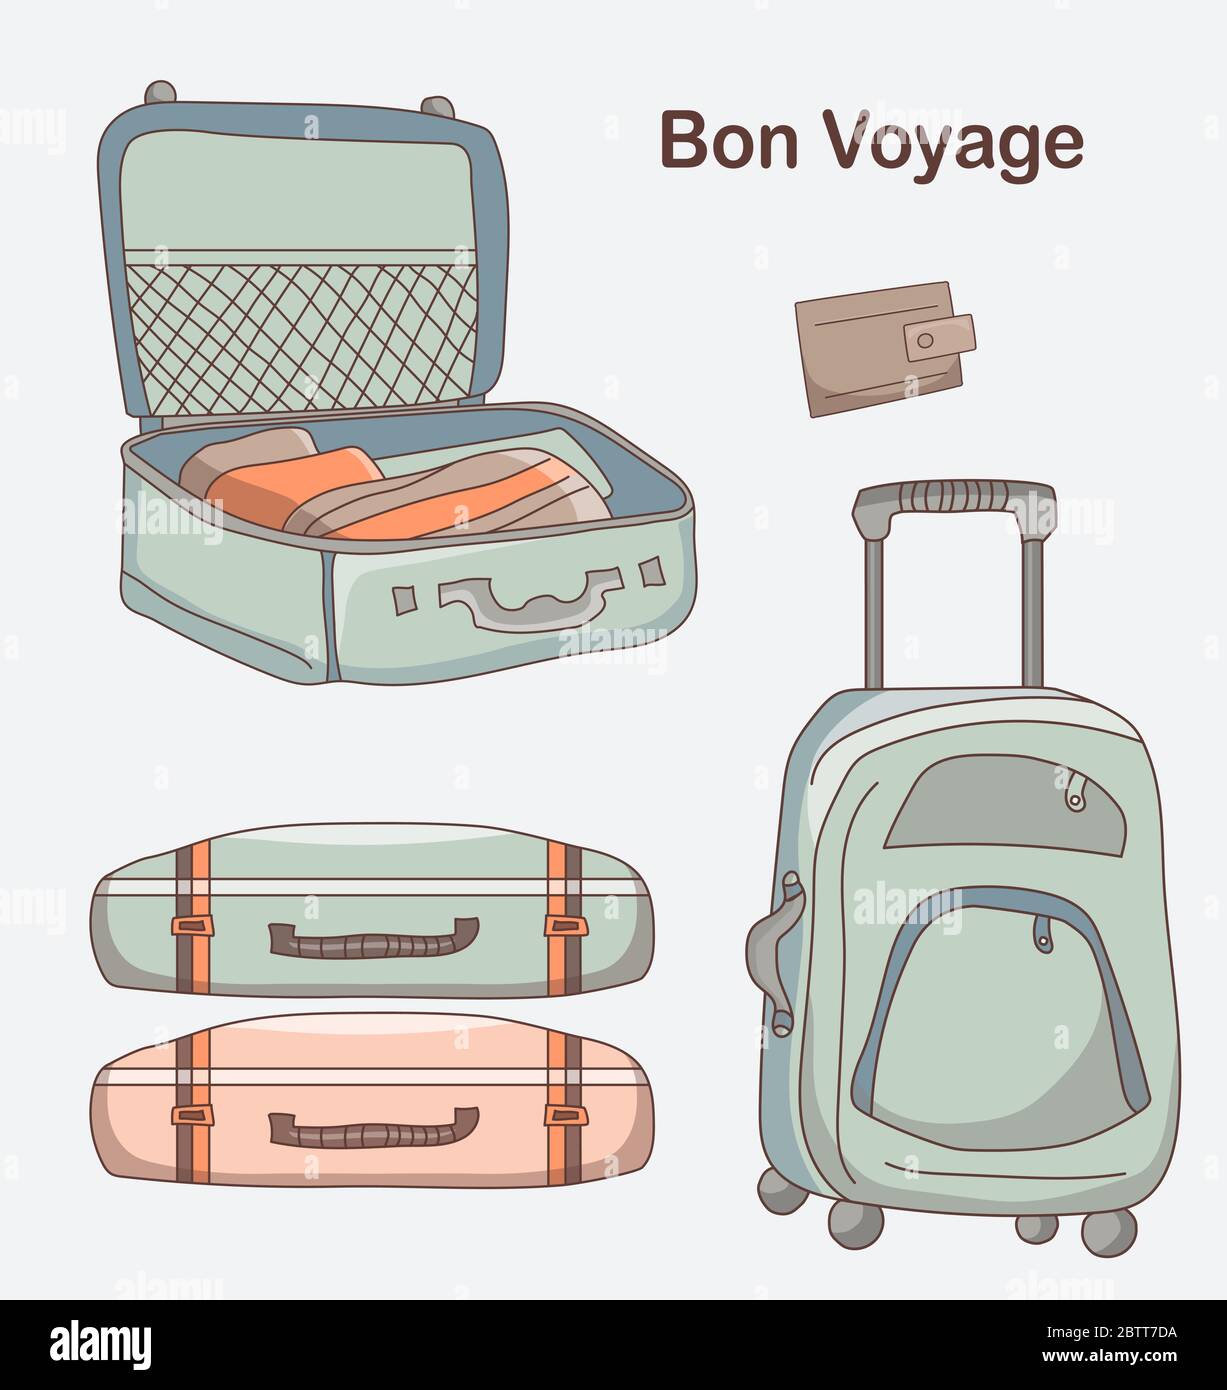 Set of vector pictures of different types of luggage for travel. A suitcase on wheels, lies and opened with things, a wallet. Bon voyage. Stock Vector